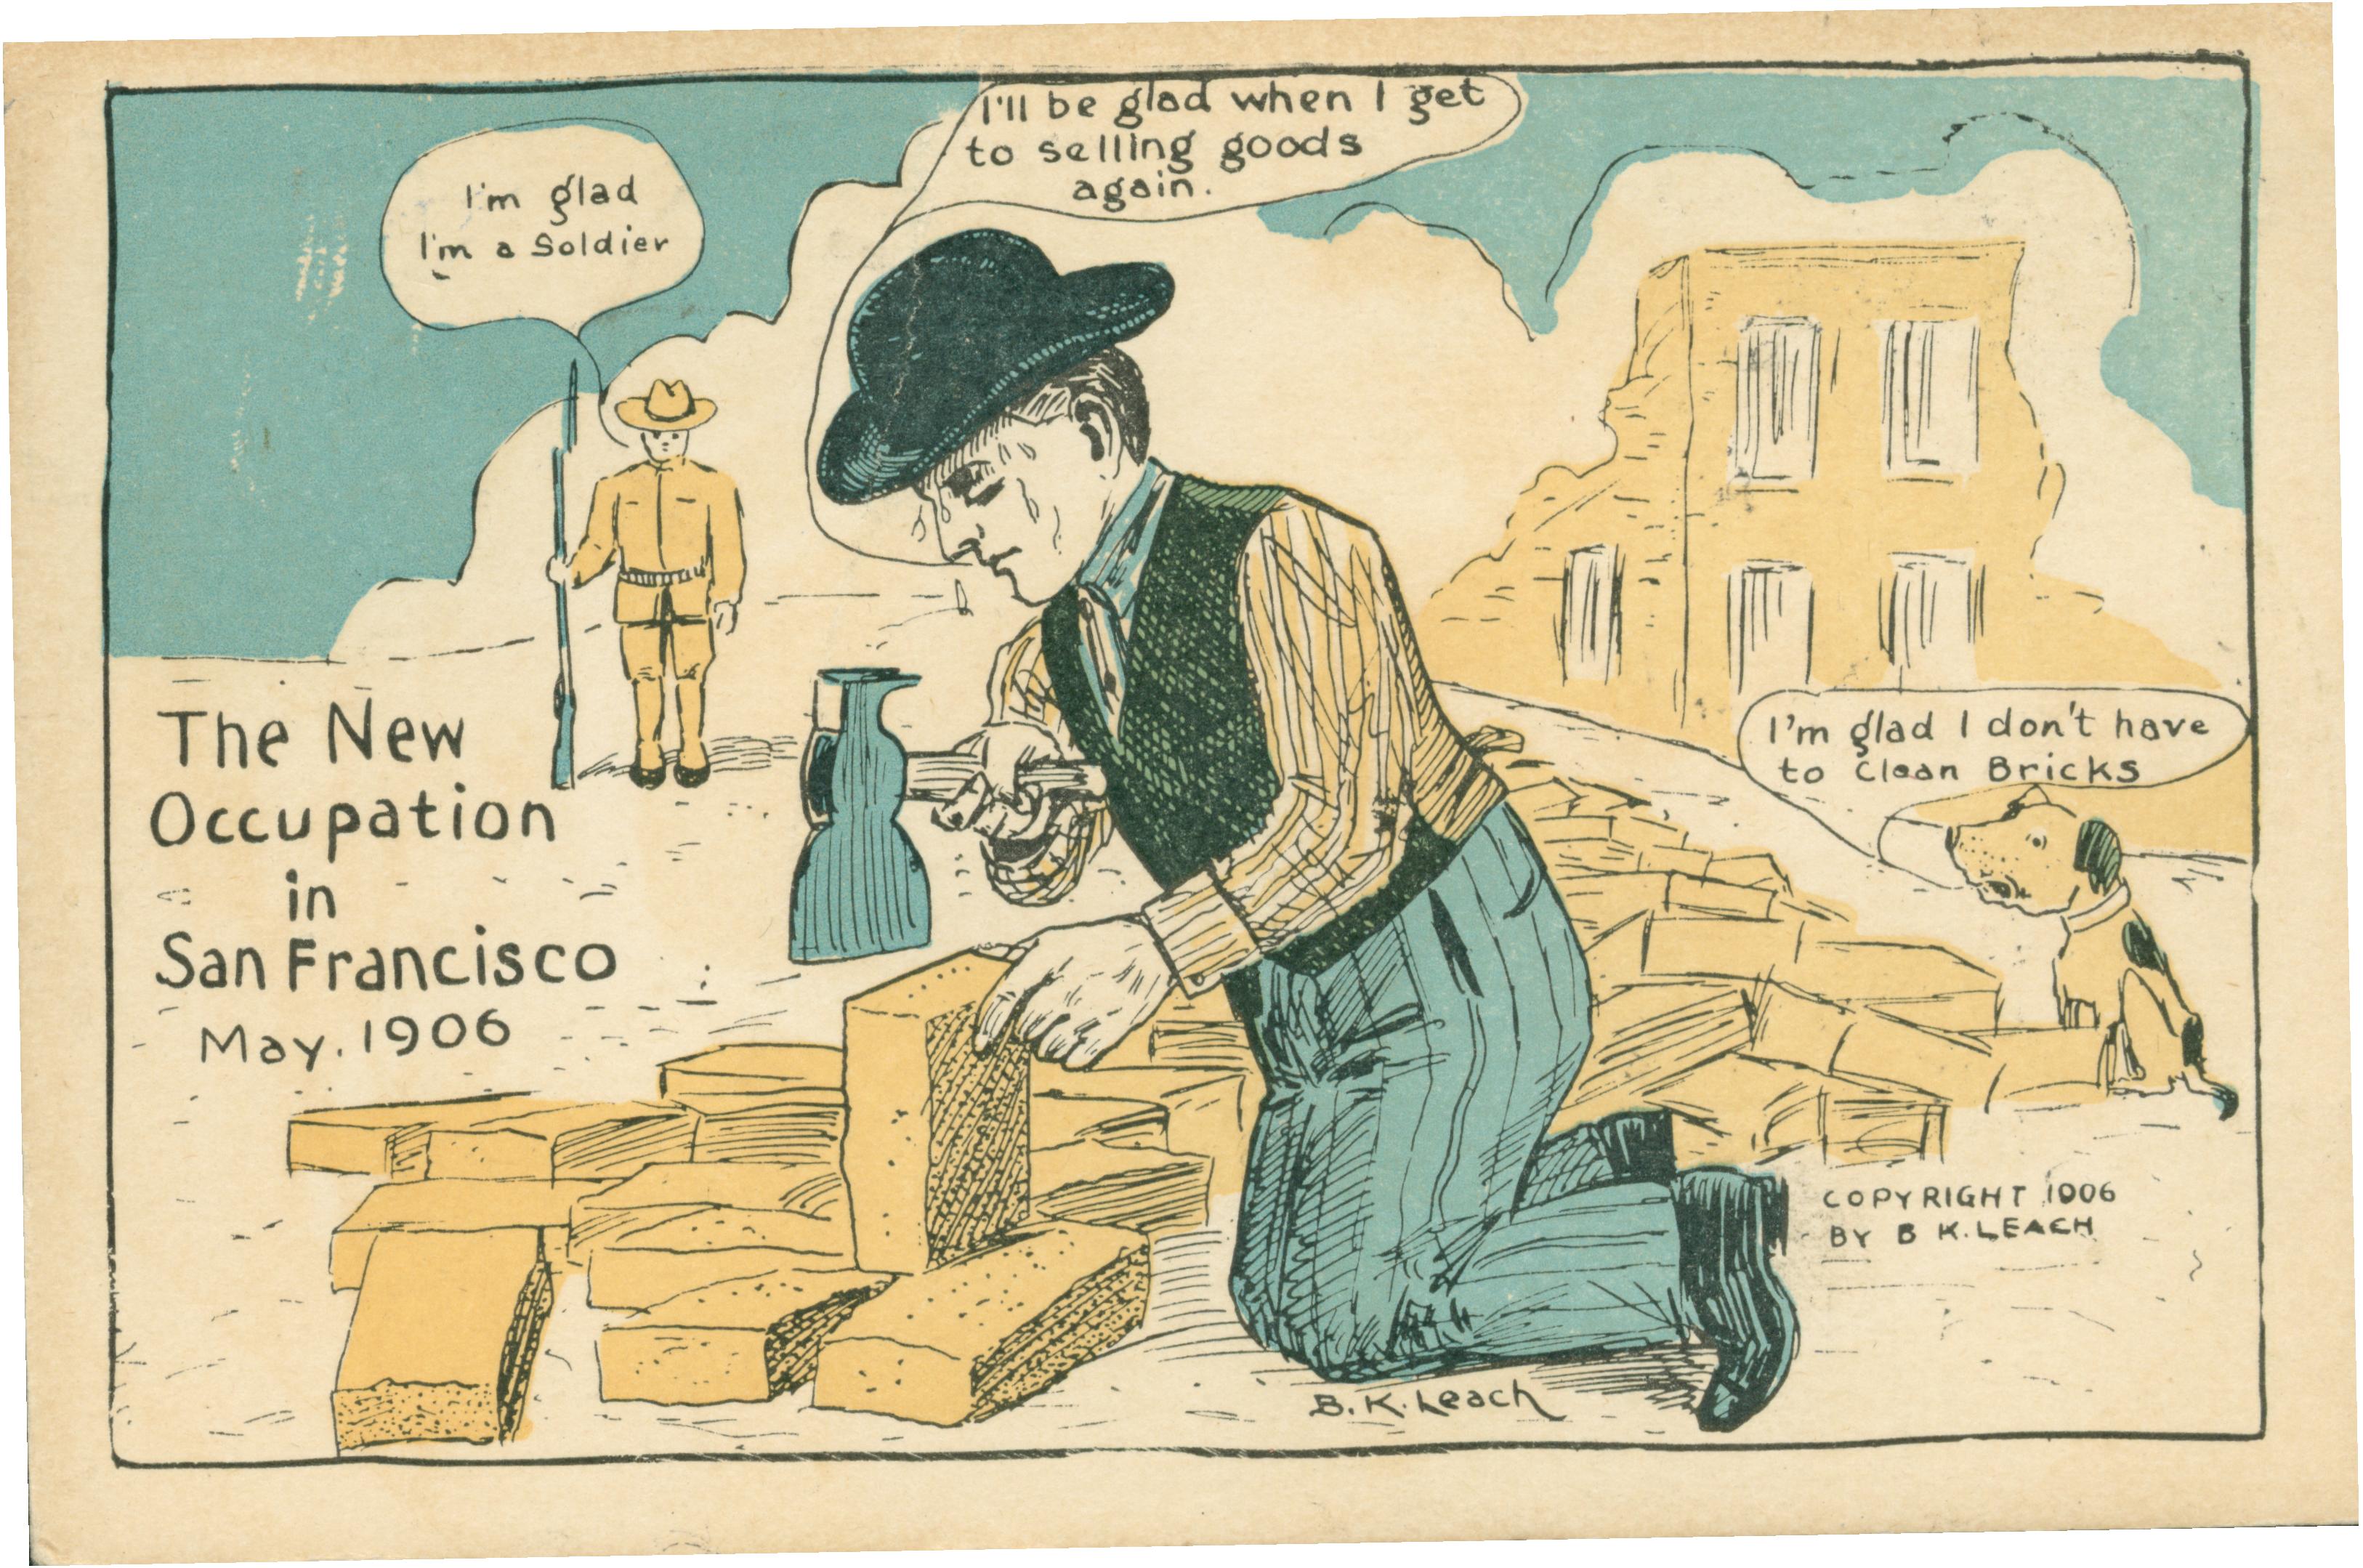 Cartoon of a soldier, a brick cleaner and a dog.